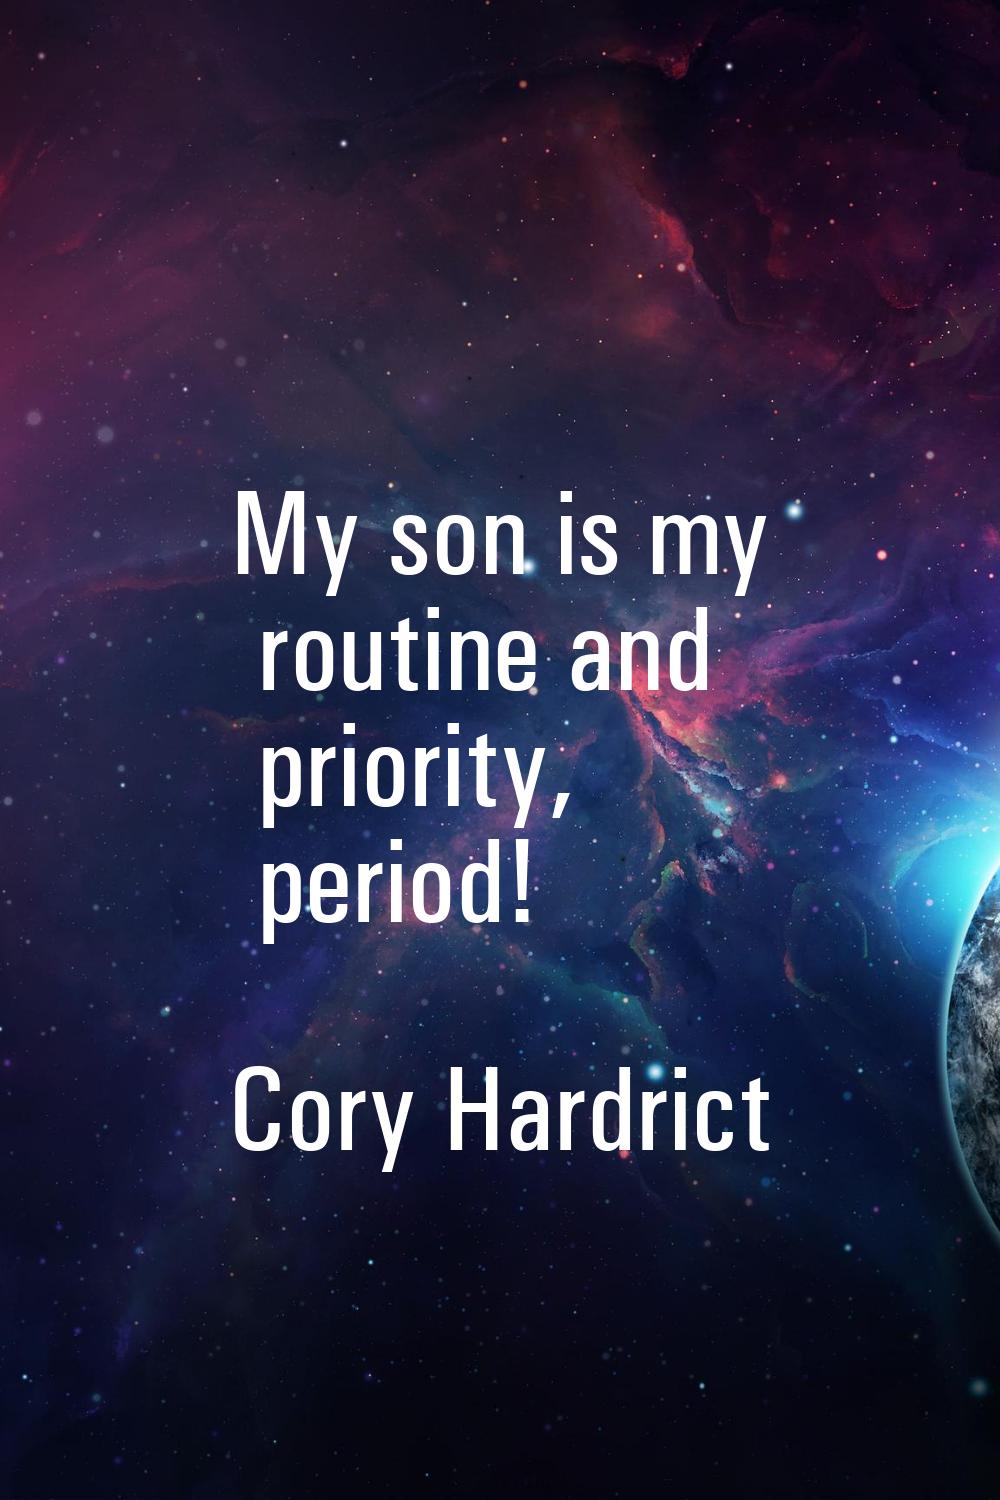 My son is my routine and priority, period!